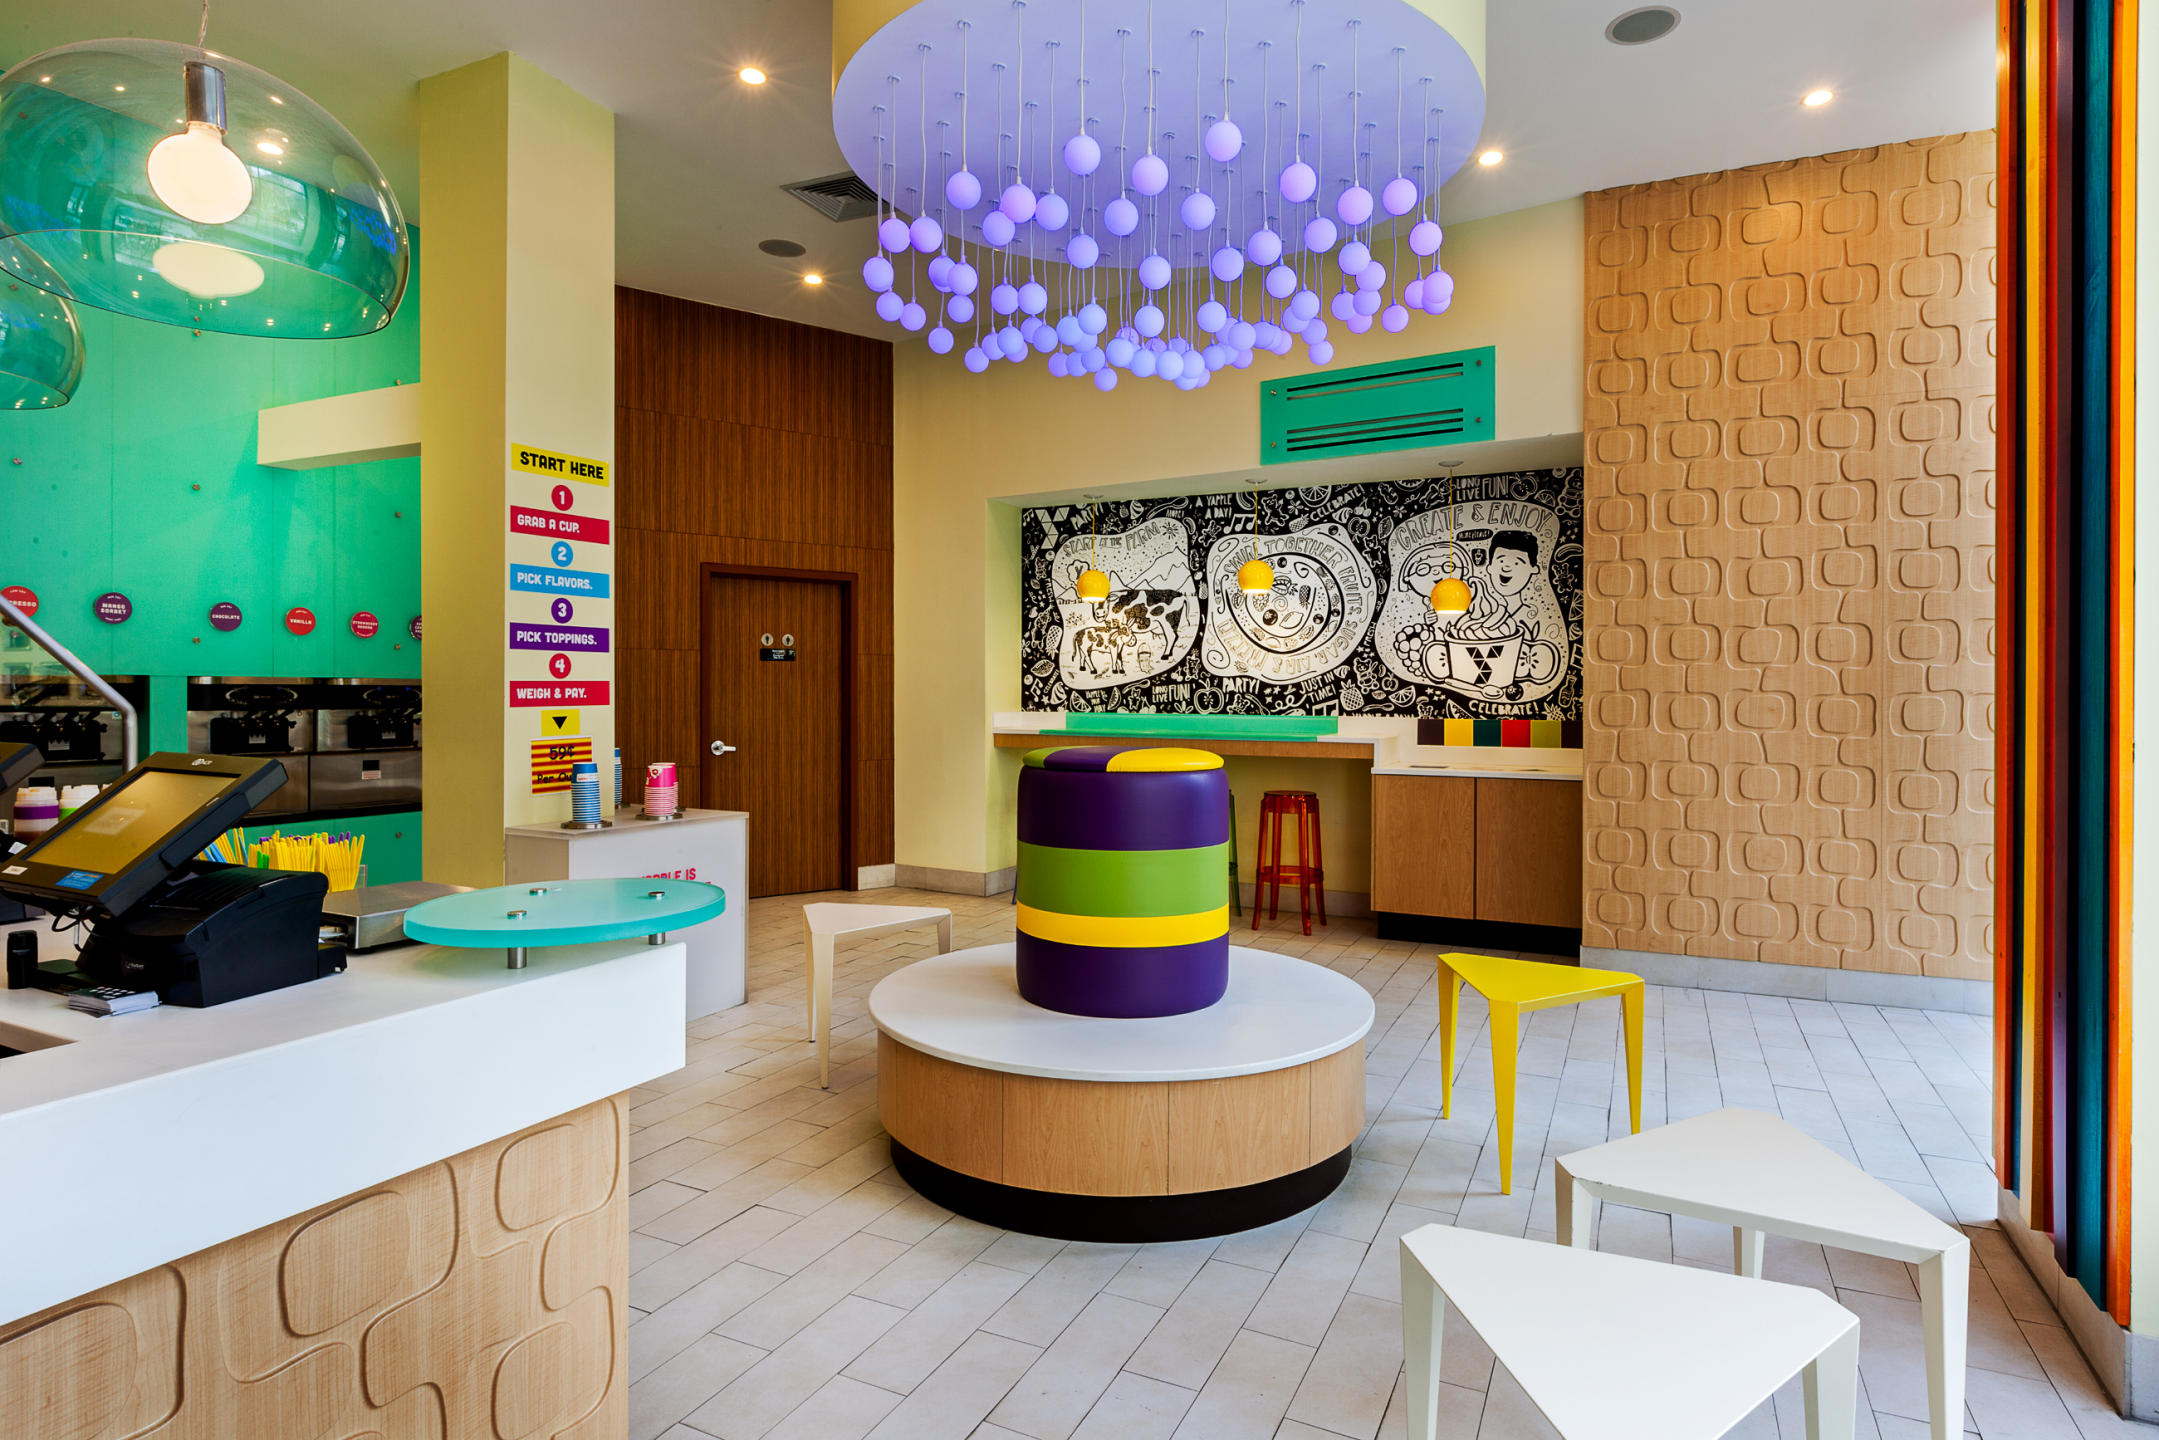 Yapple Yogurt Store - Upper Westside NYC : Miscellanous Projects : New York NY Architectural Photographer | Interior and Exterior